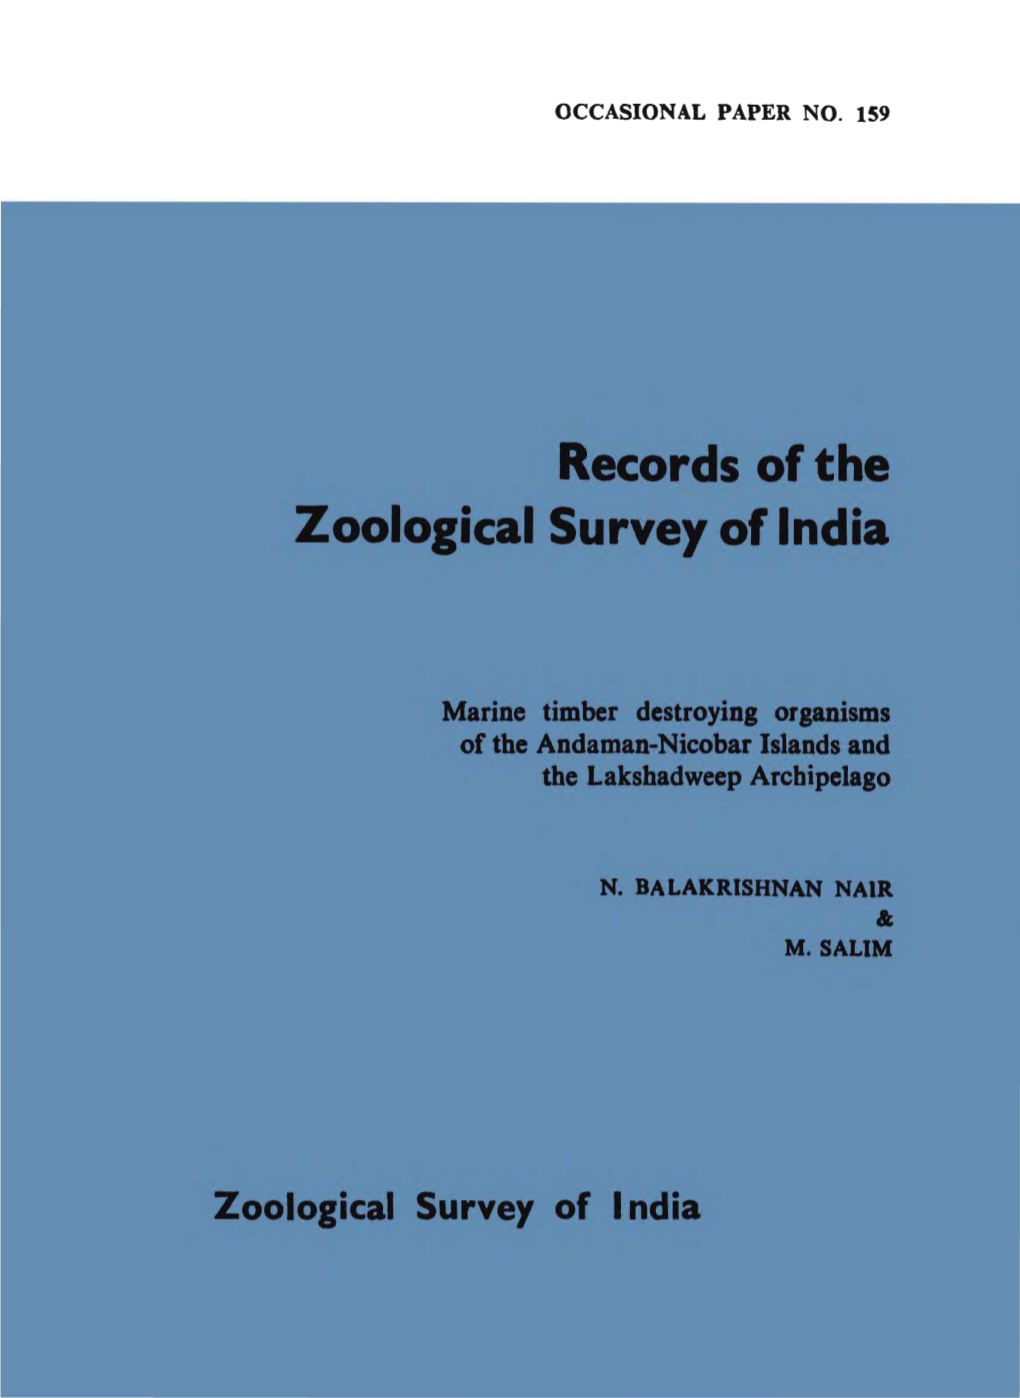 Occasional Paper No. 159 Records of the Zoological Survey of India